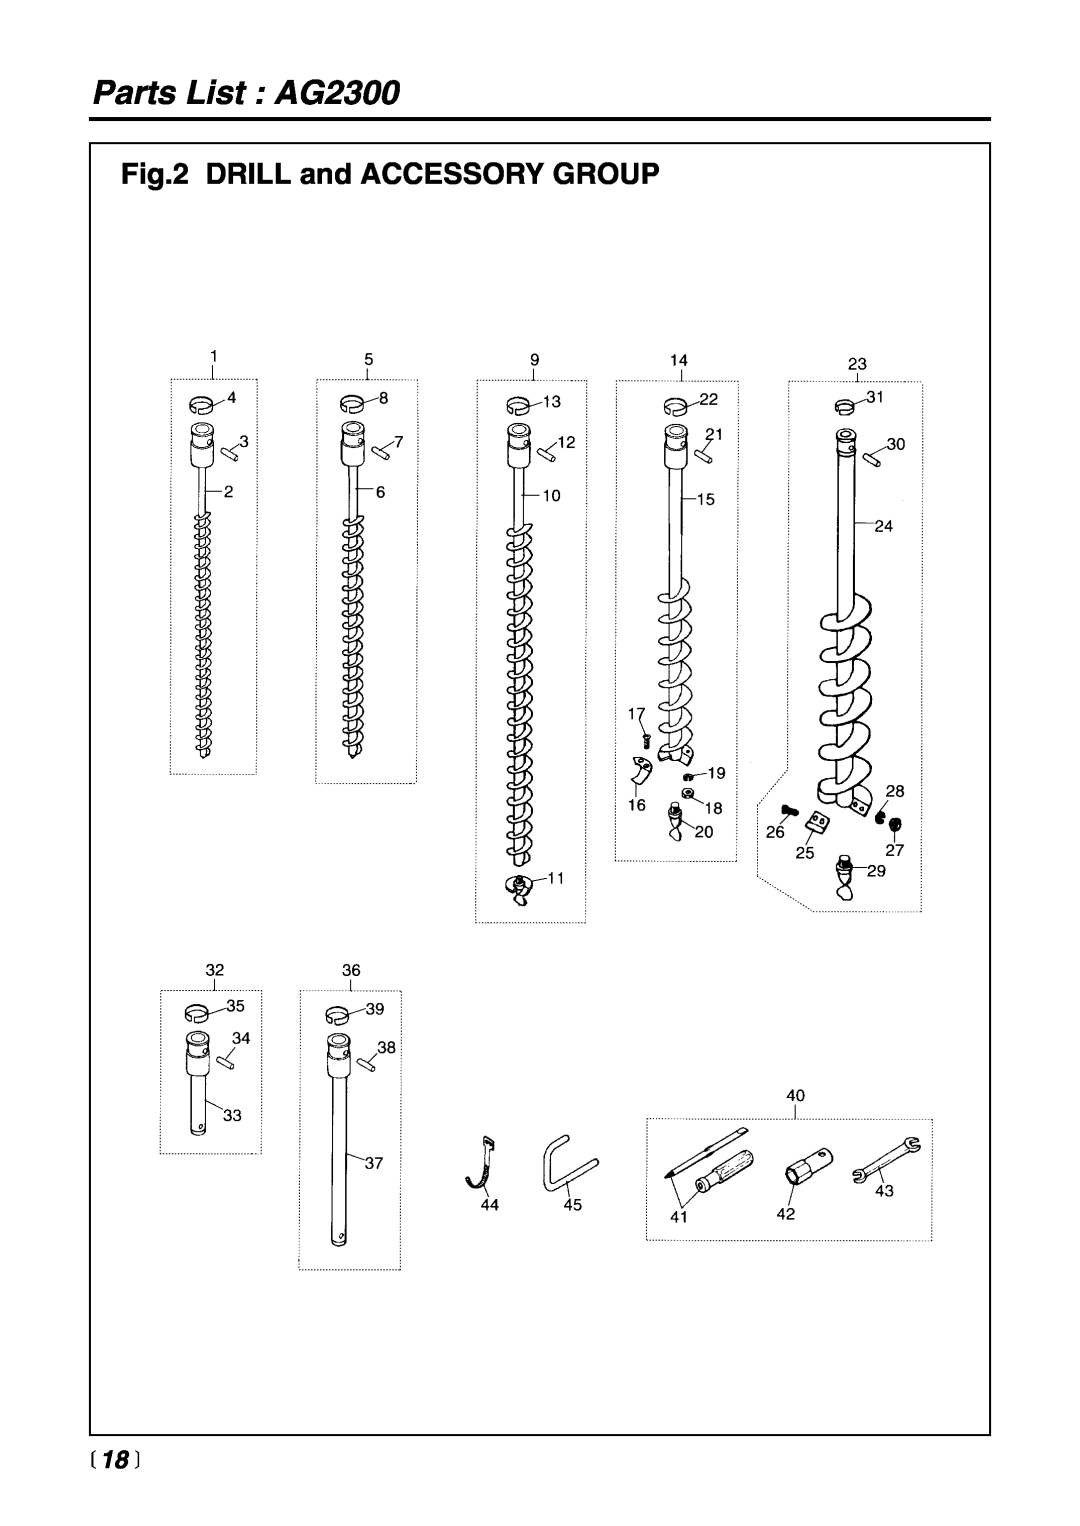 RedMax manual DRILL and ACCESSORY GROUP,  18 , Parts List AG2300 